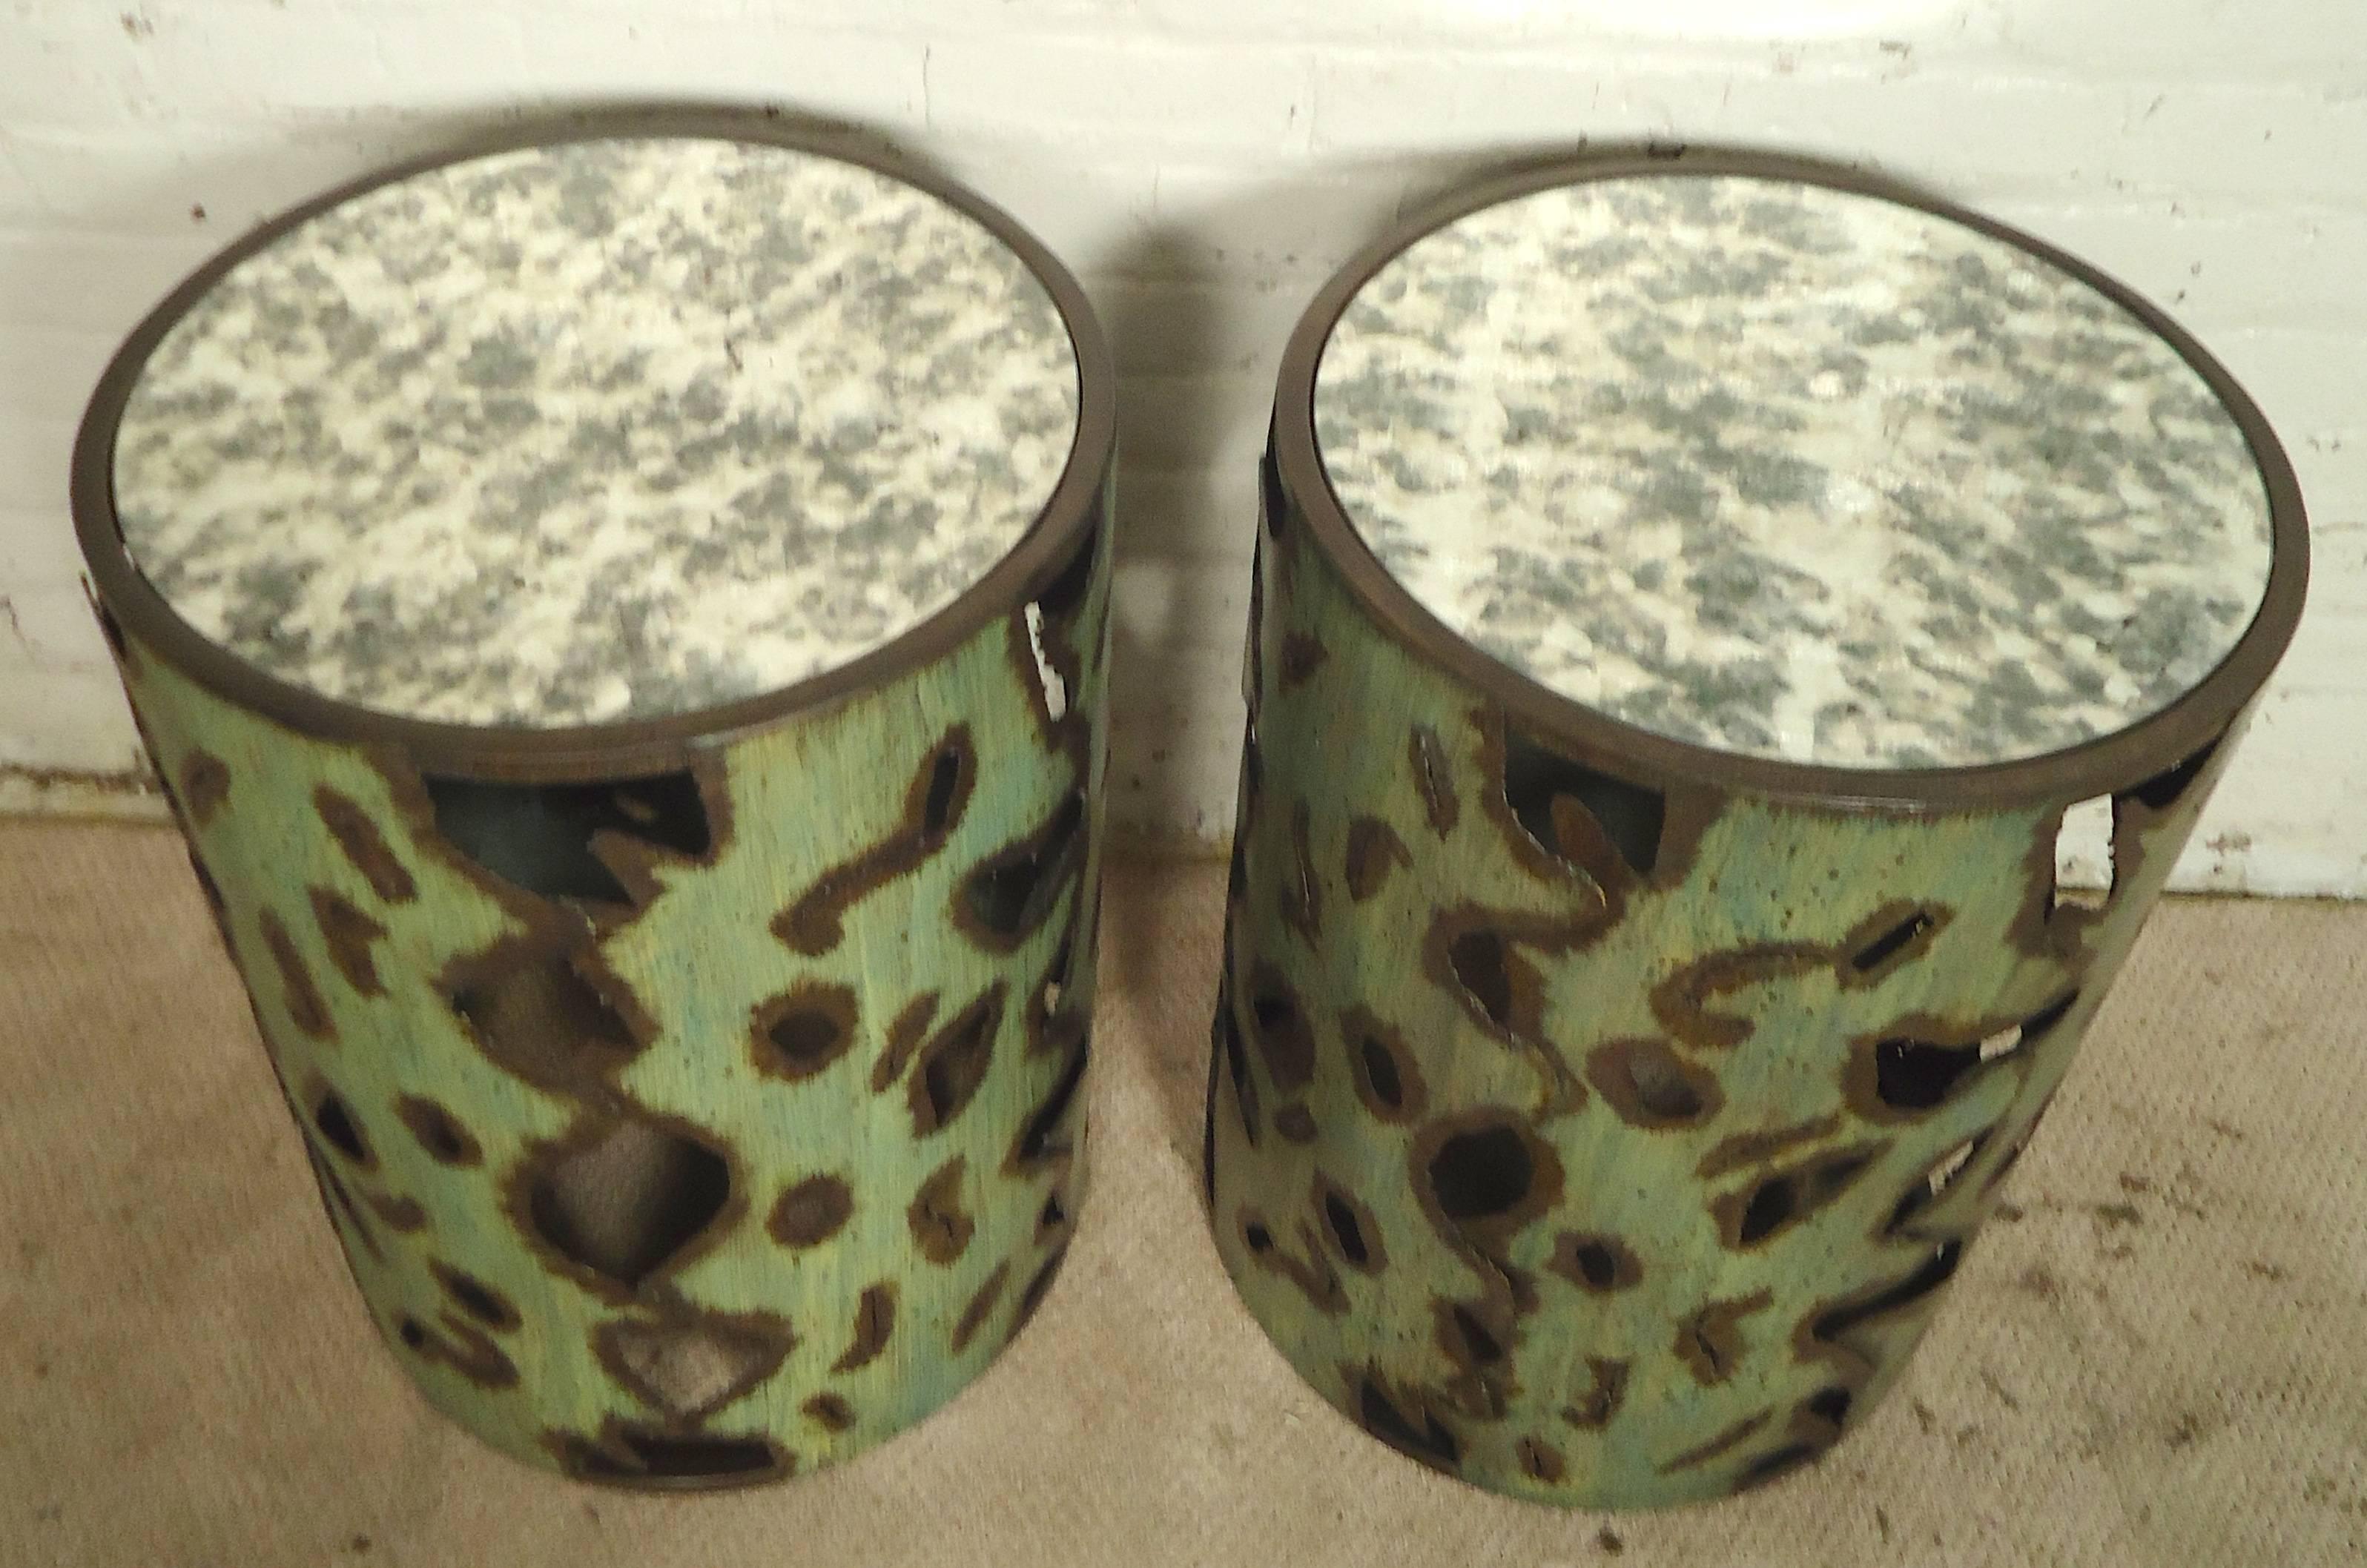 Round pedestal style side tables with mirrored tops. Torch cut metal base with green patina style coloring. Make great sofa side tables.

(Please confirm item location - NY or NJ - with dealer)
